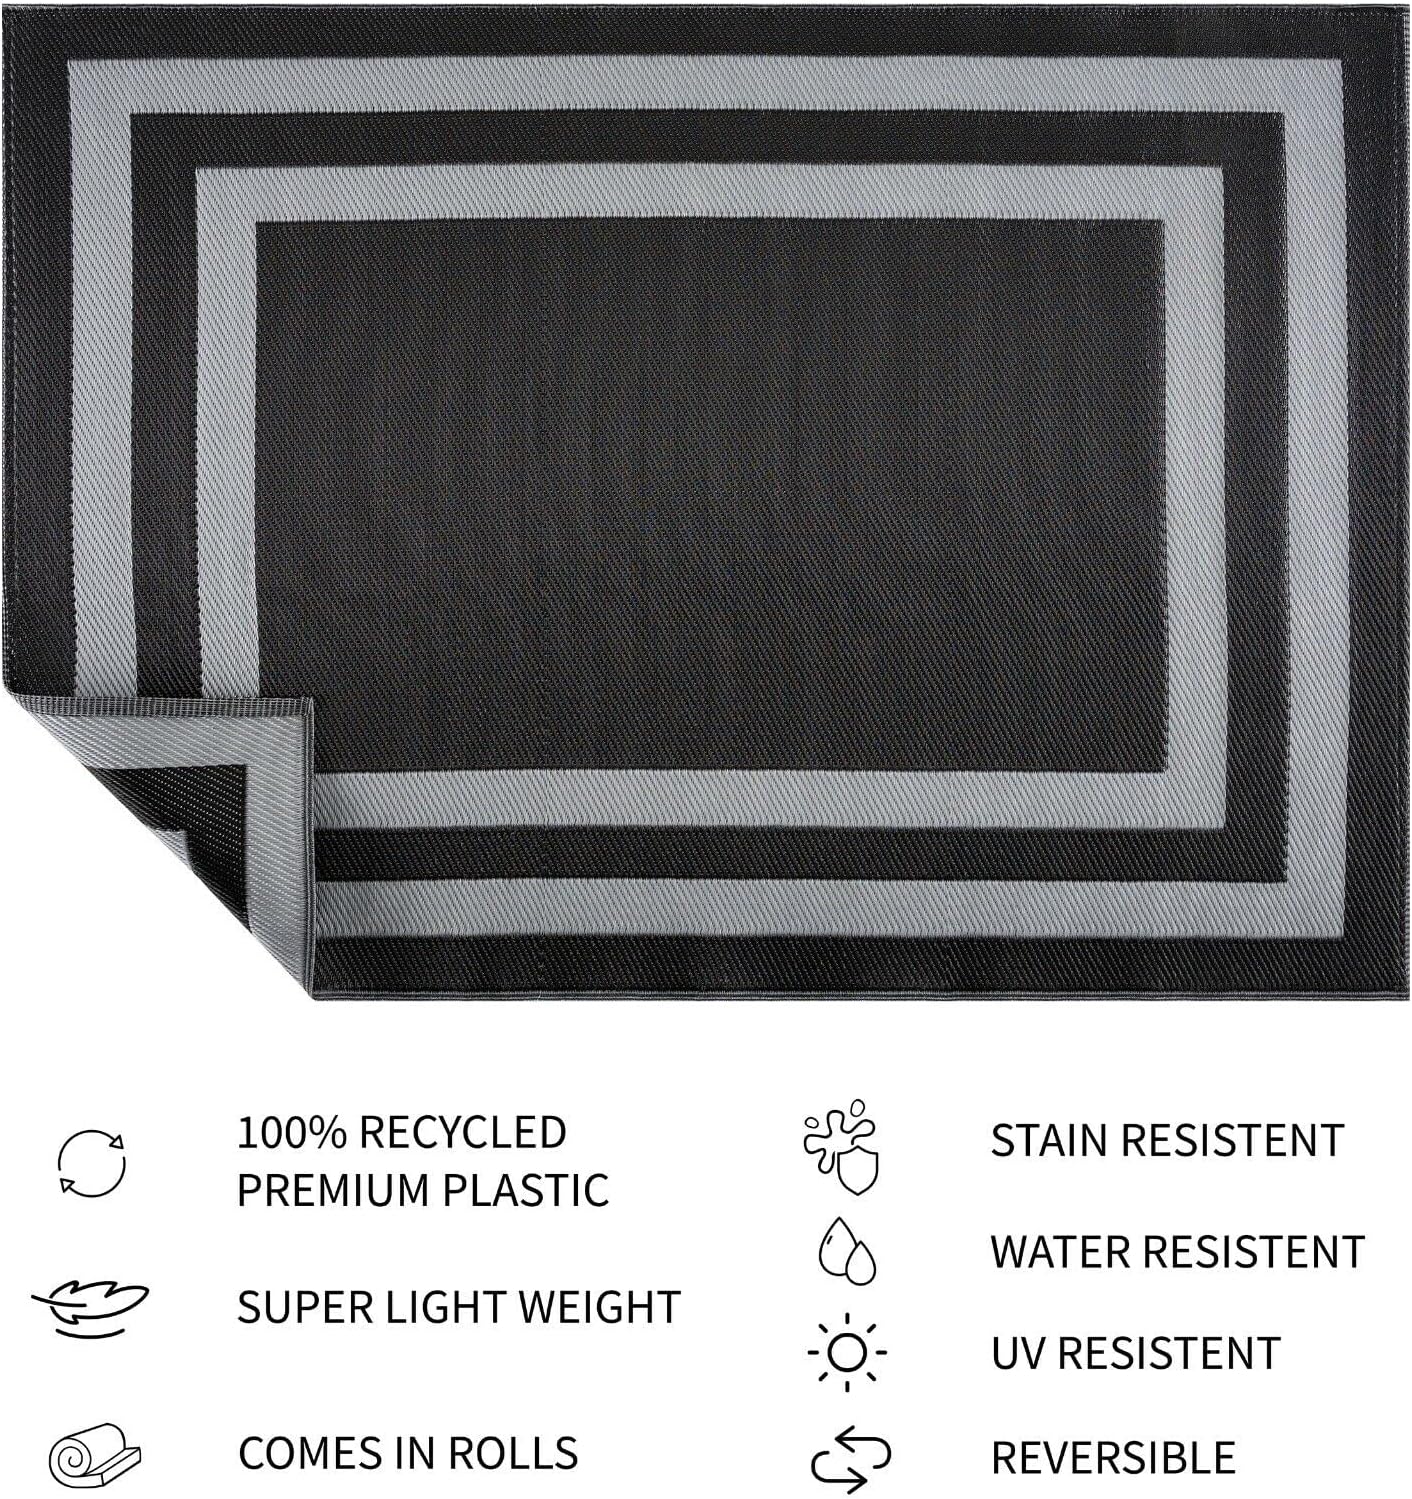 Playa Outdoor Rug - Crease-Free Recycled Plastic Floor Mat for Patio, Camping, Beach, Balcony, Porch, Deck - Weather, Water, Stain, Lightweight, Fade and UV Resistant - Paris- Black & Gray